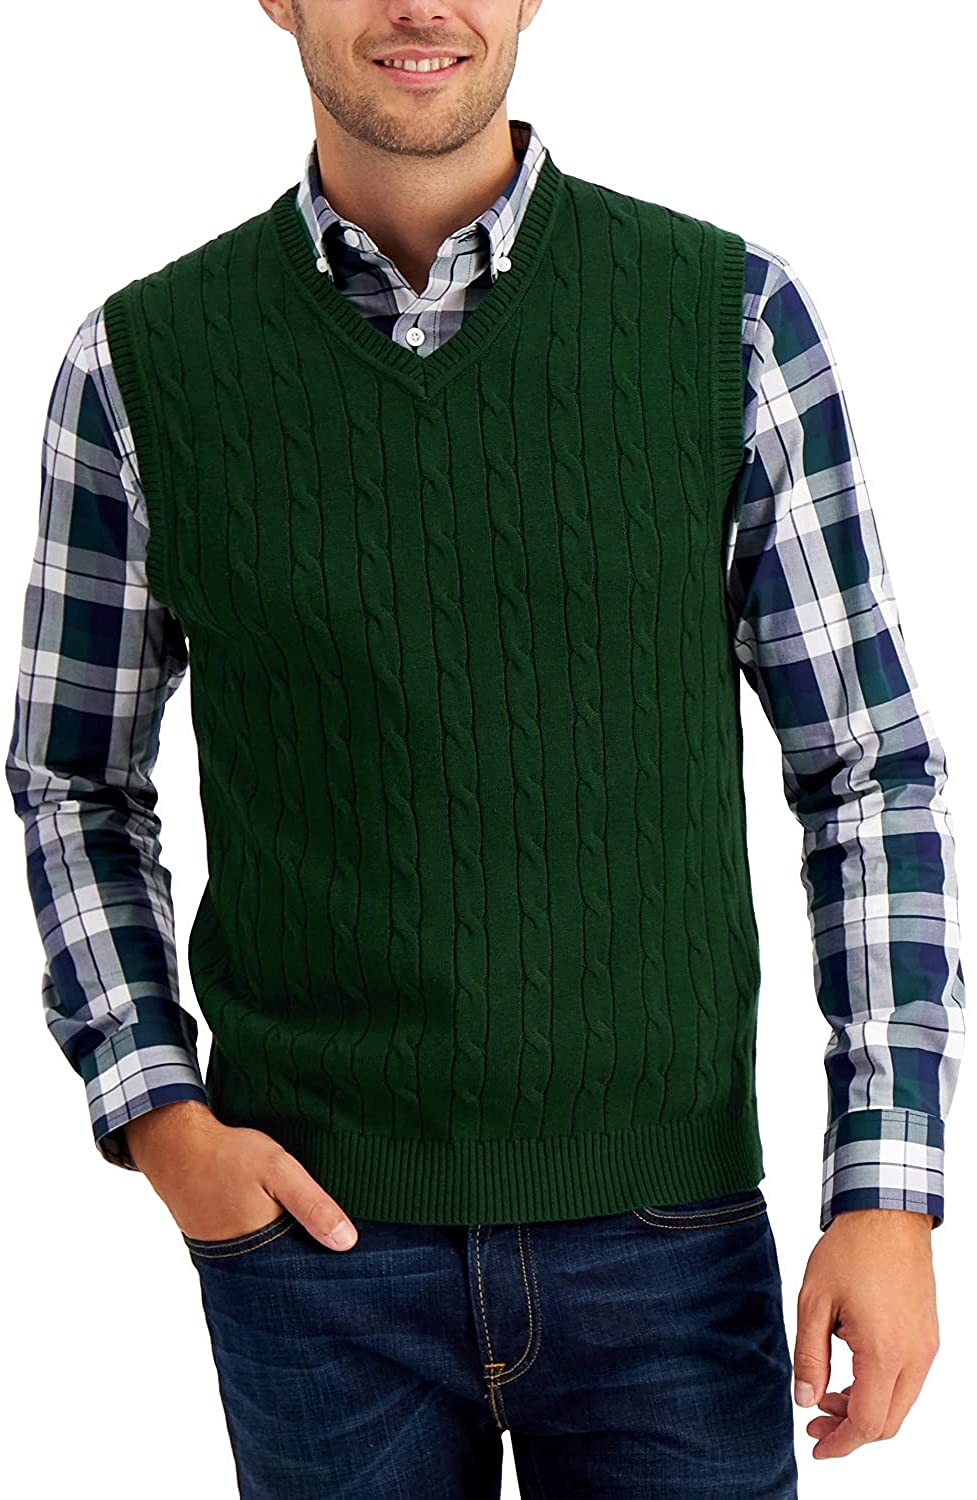 MNCEGEER Mens Casual Knitwear V-Neck Sleeveless Slim Fit Pullover Knitted Sweater Vest 